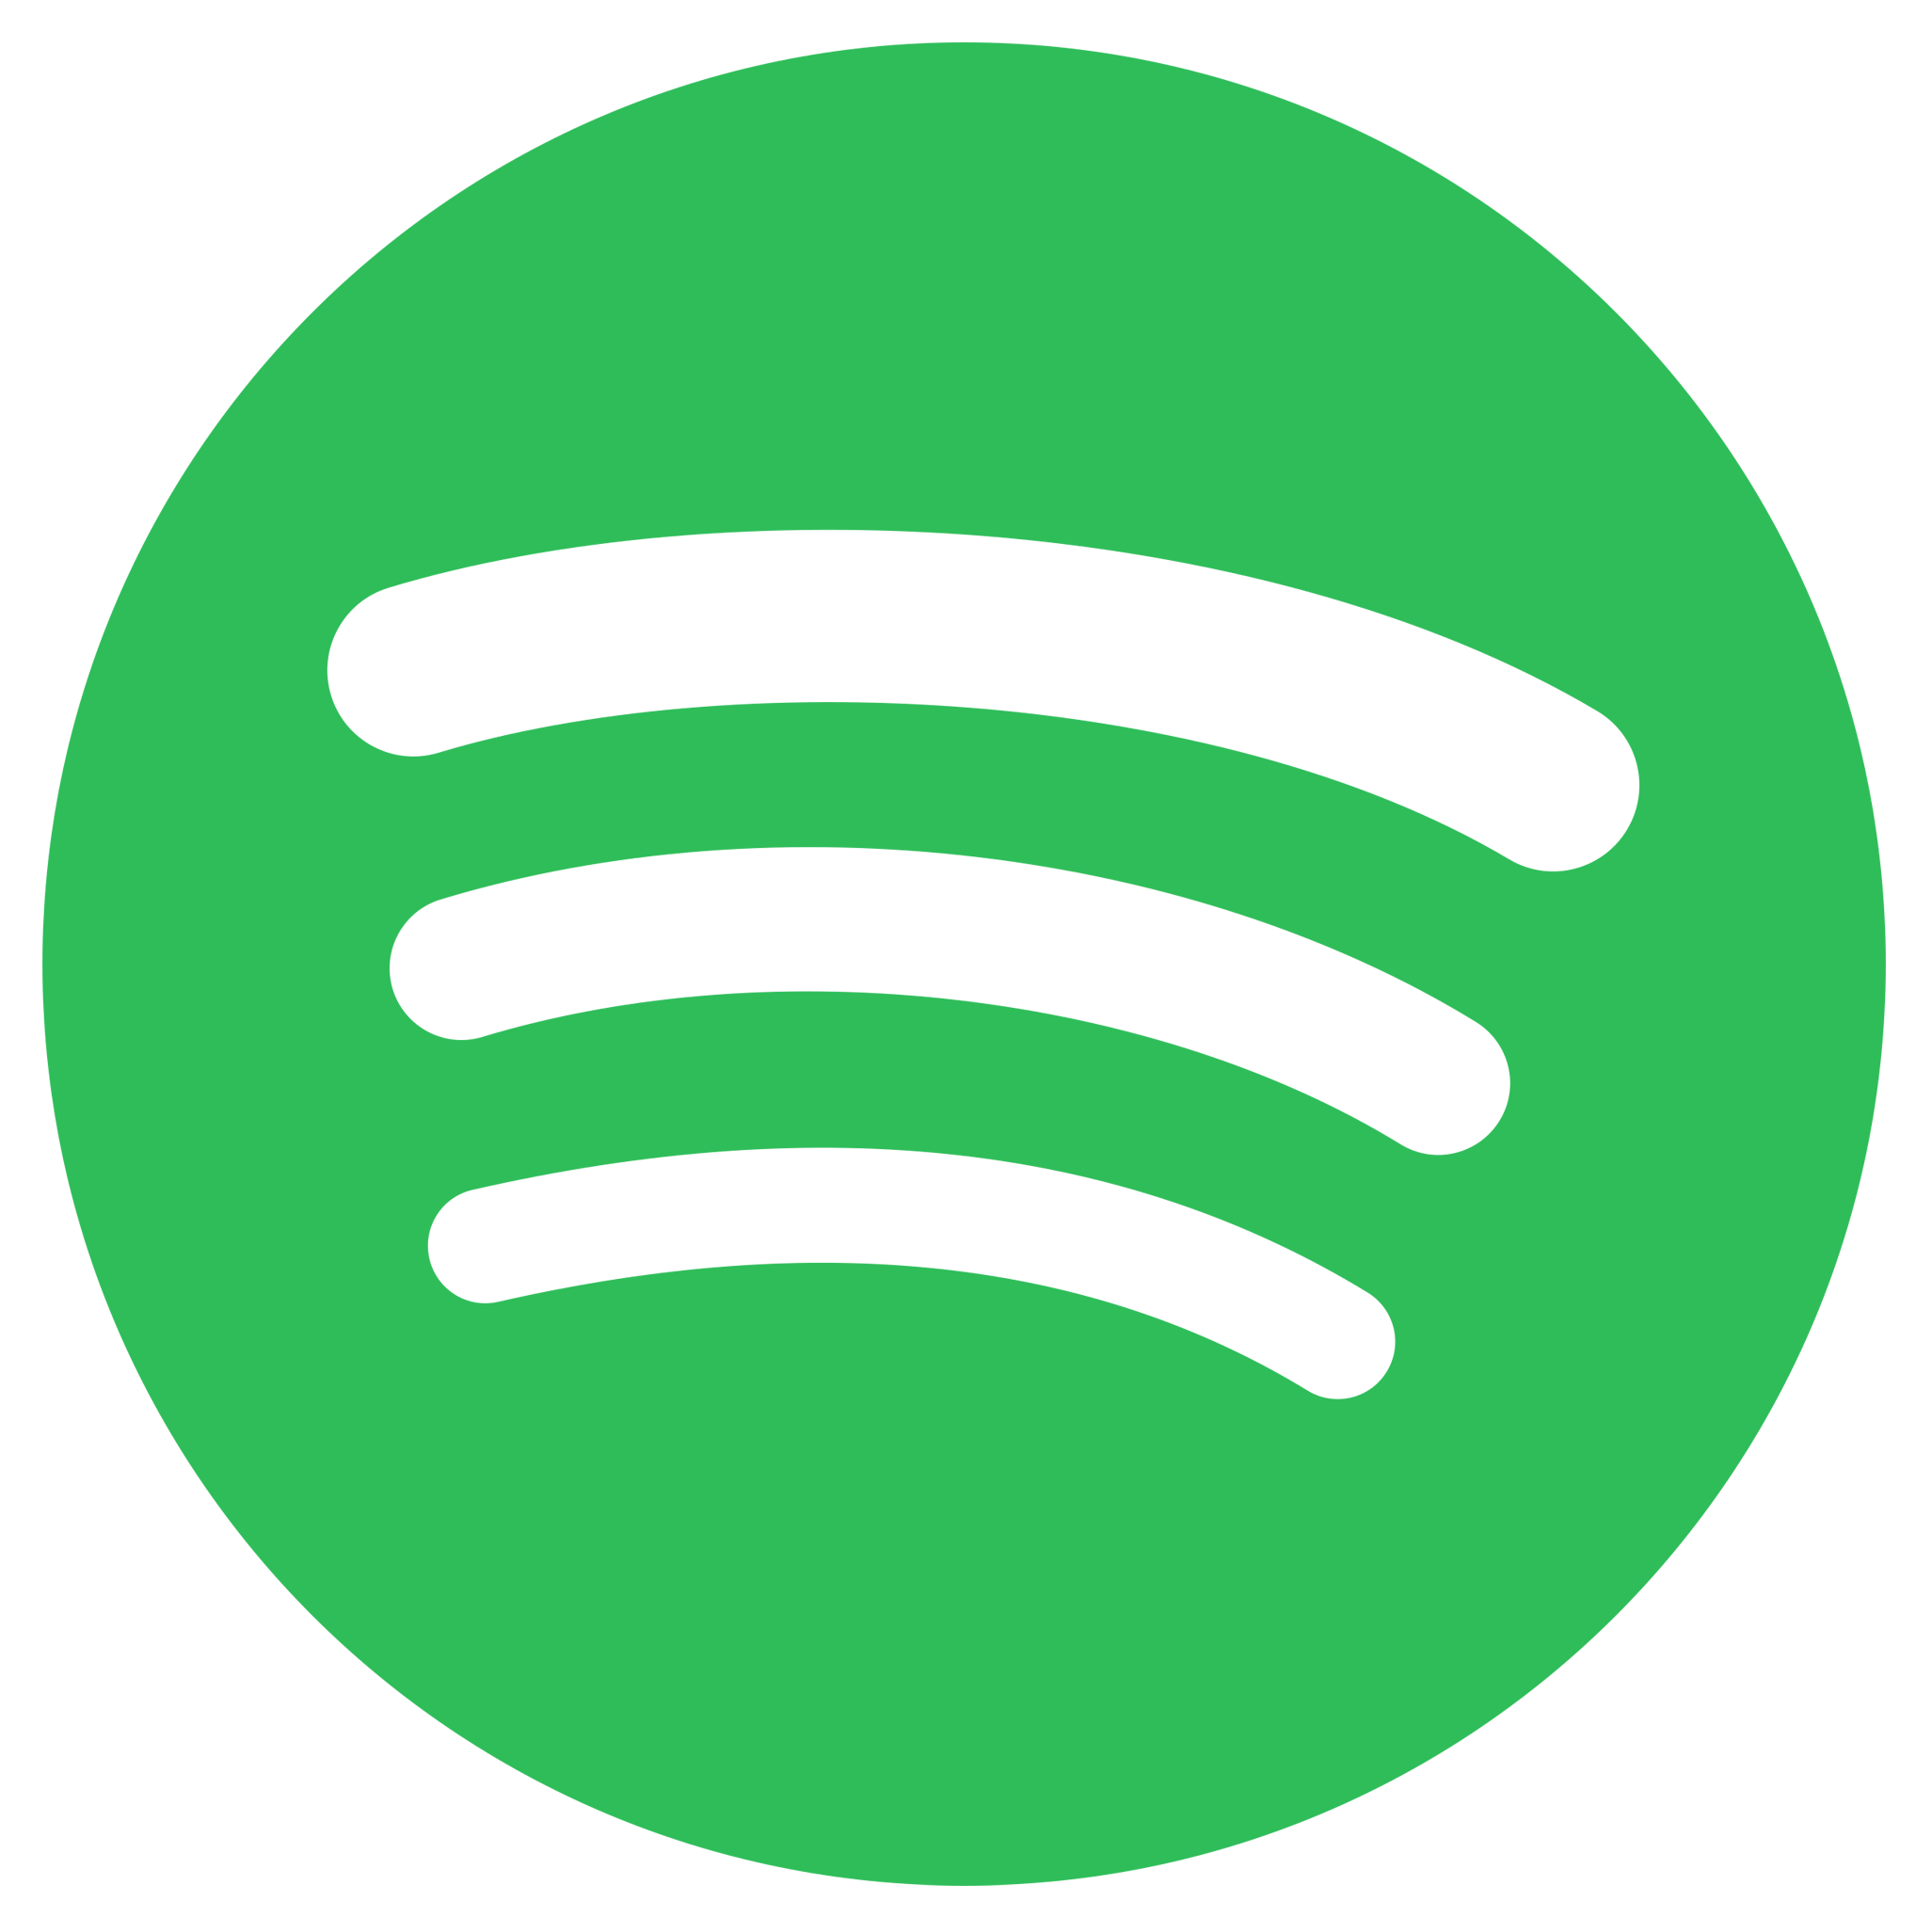 App Icon Spotify Podcasts